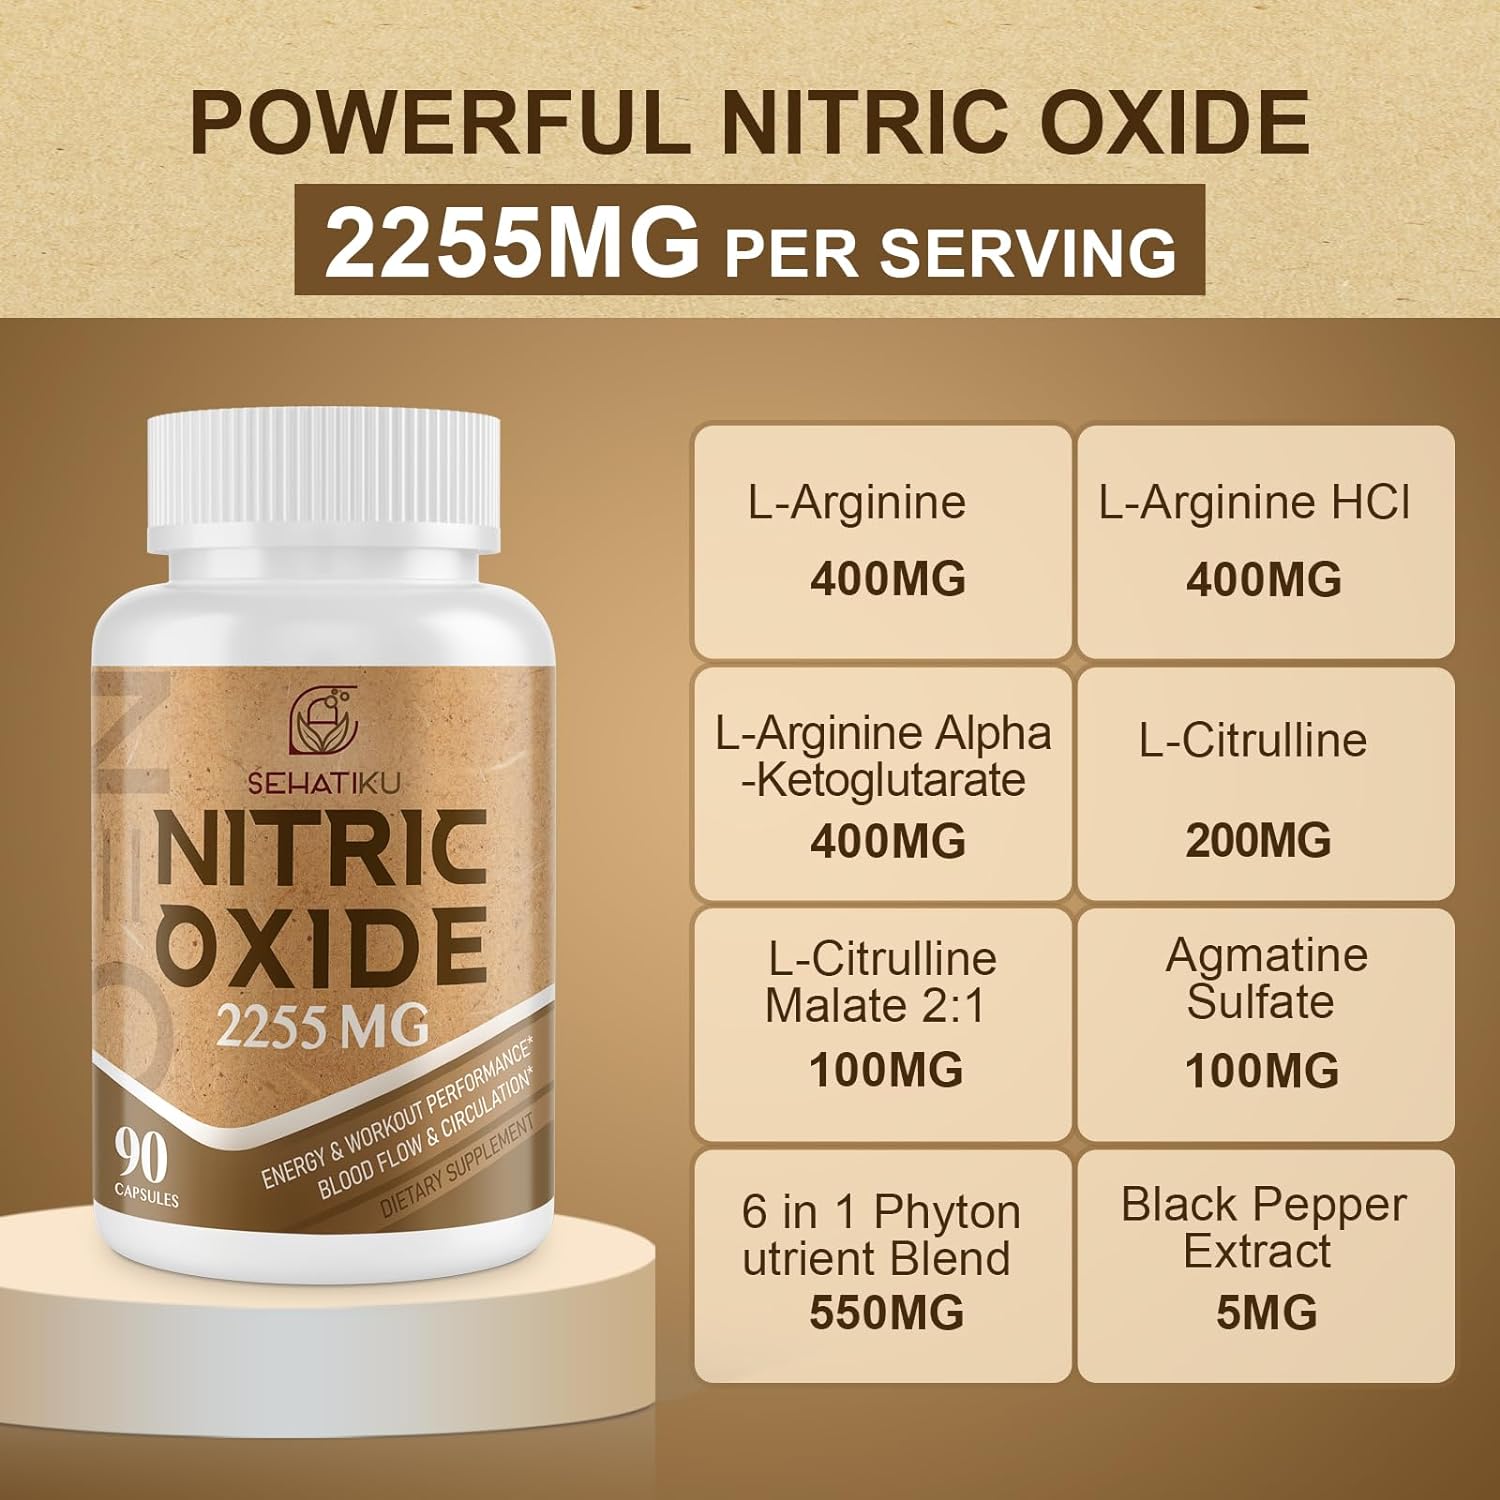 Nitric Oxide Supplement 2255 MG Review